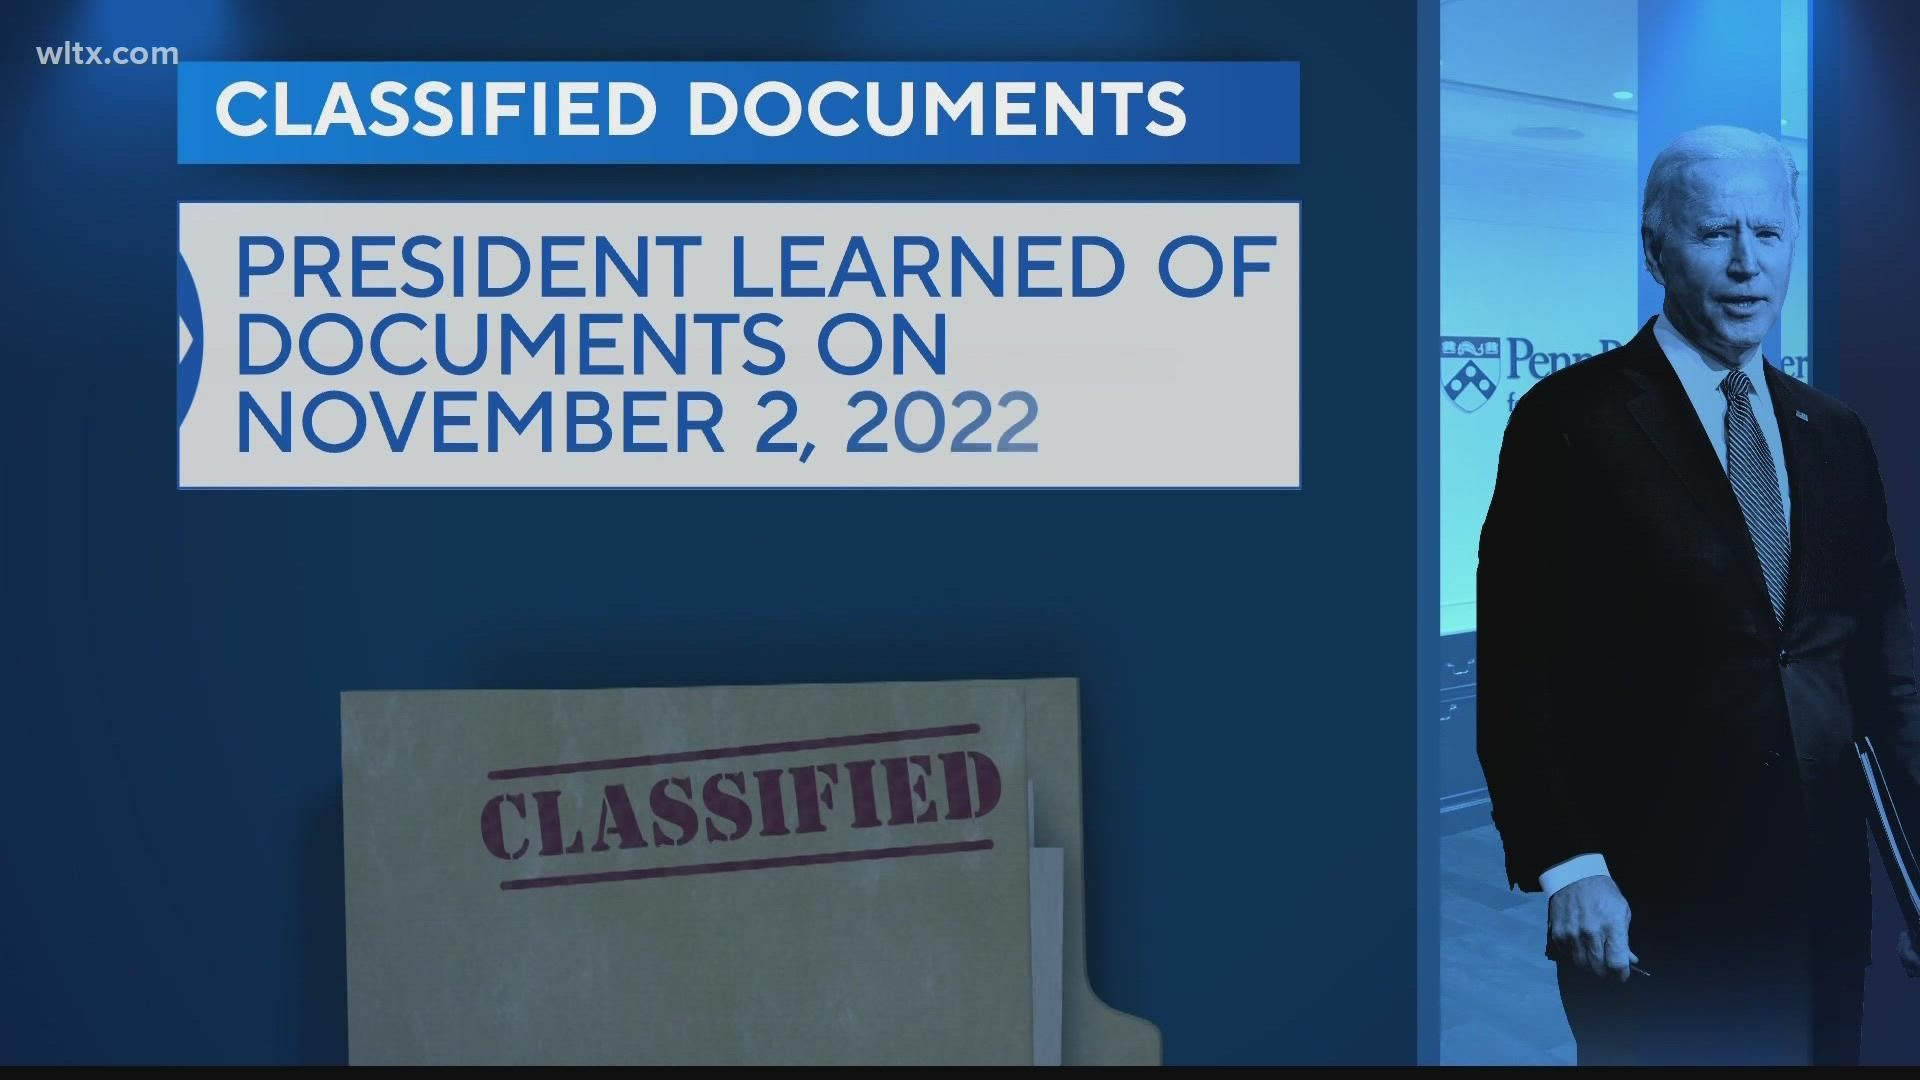 The revelation comes days after an attorney for the president said Biden’s lawyers had discovered classified documents at his former office space in Washington.